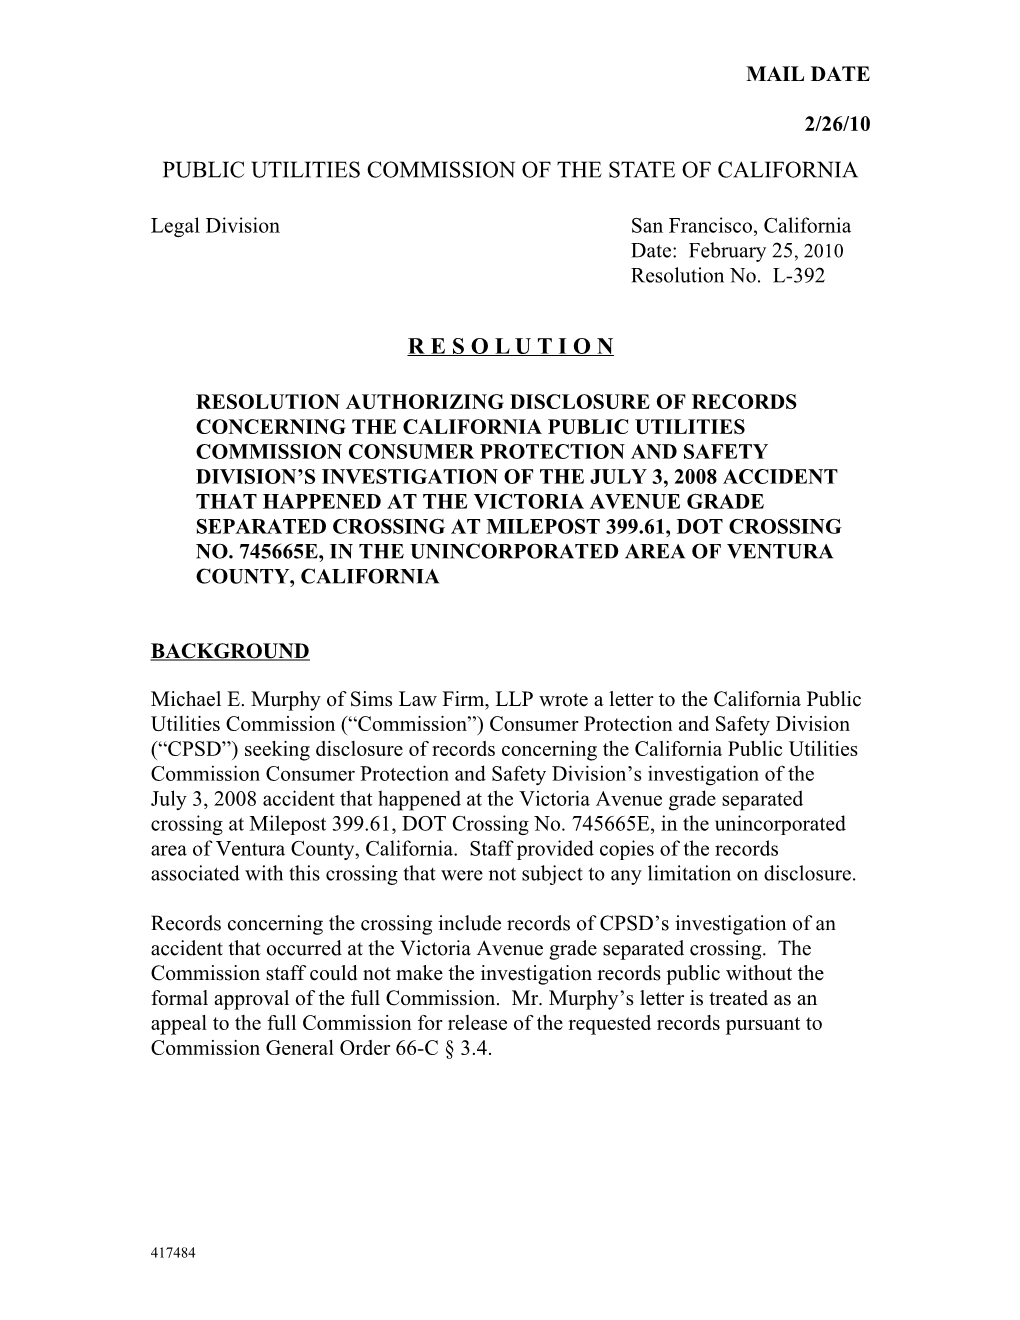 Public Utilities Commission of the State of California s95